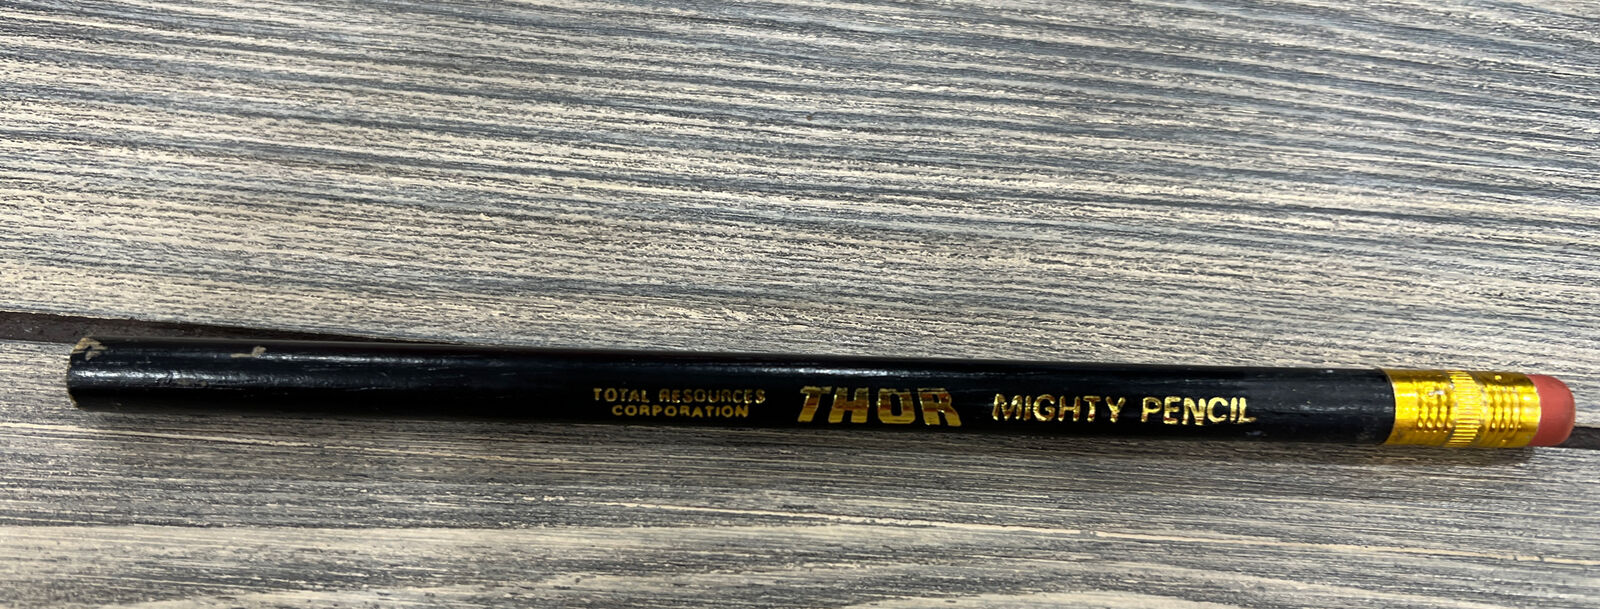 Vintage Unsharpened Pencil Thor Mighty Pencil Total Resources Corporation